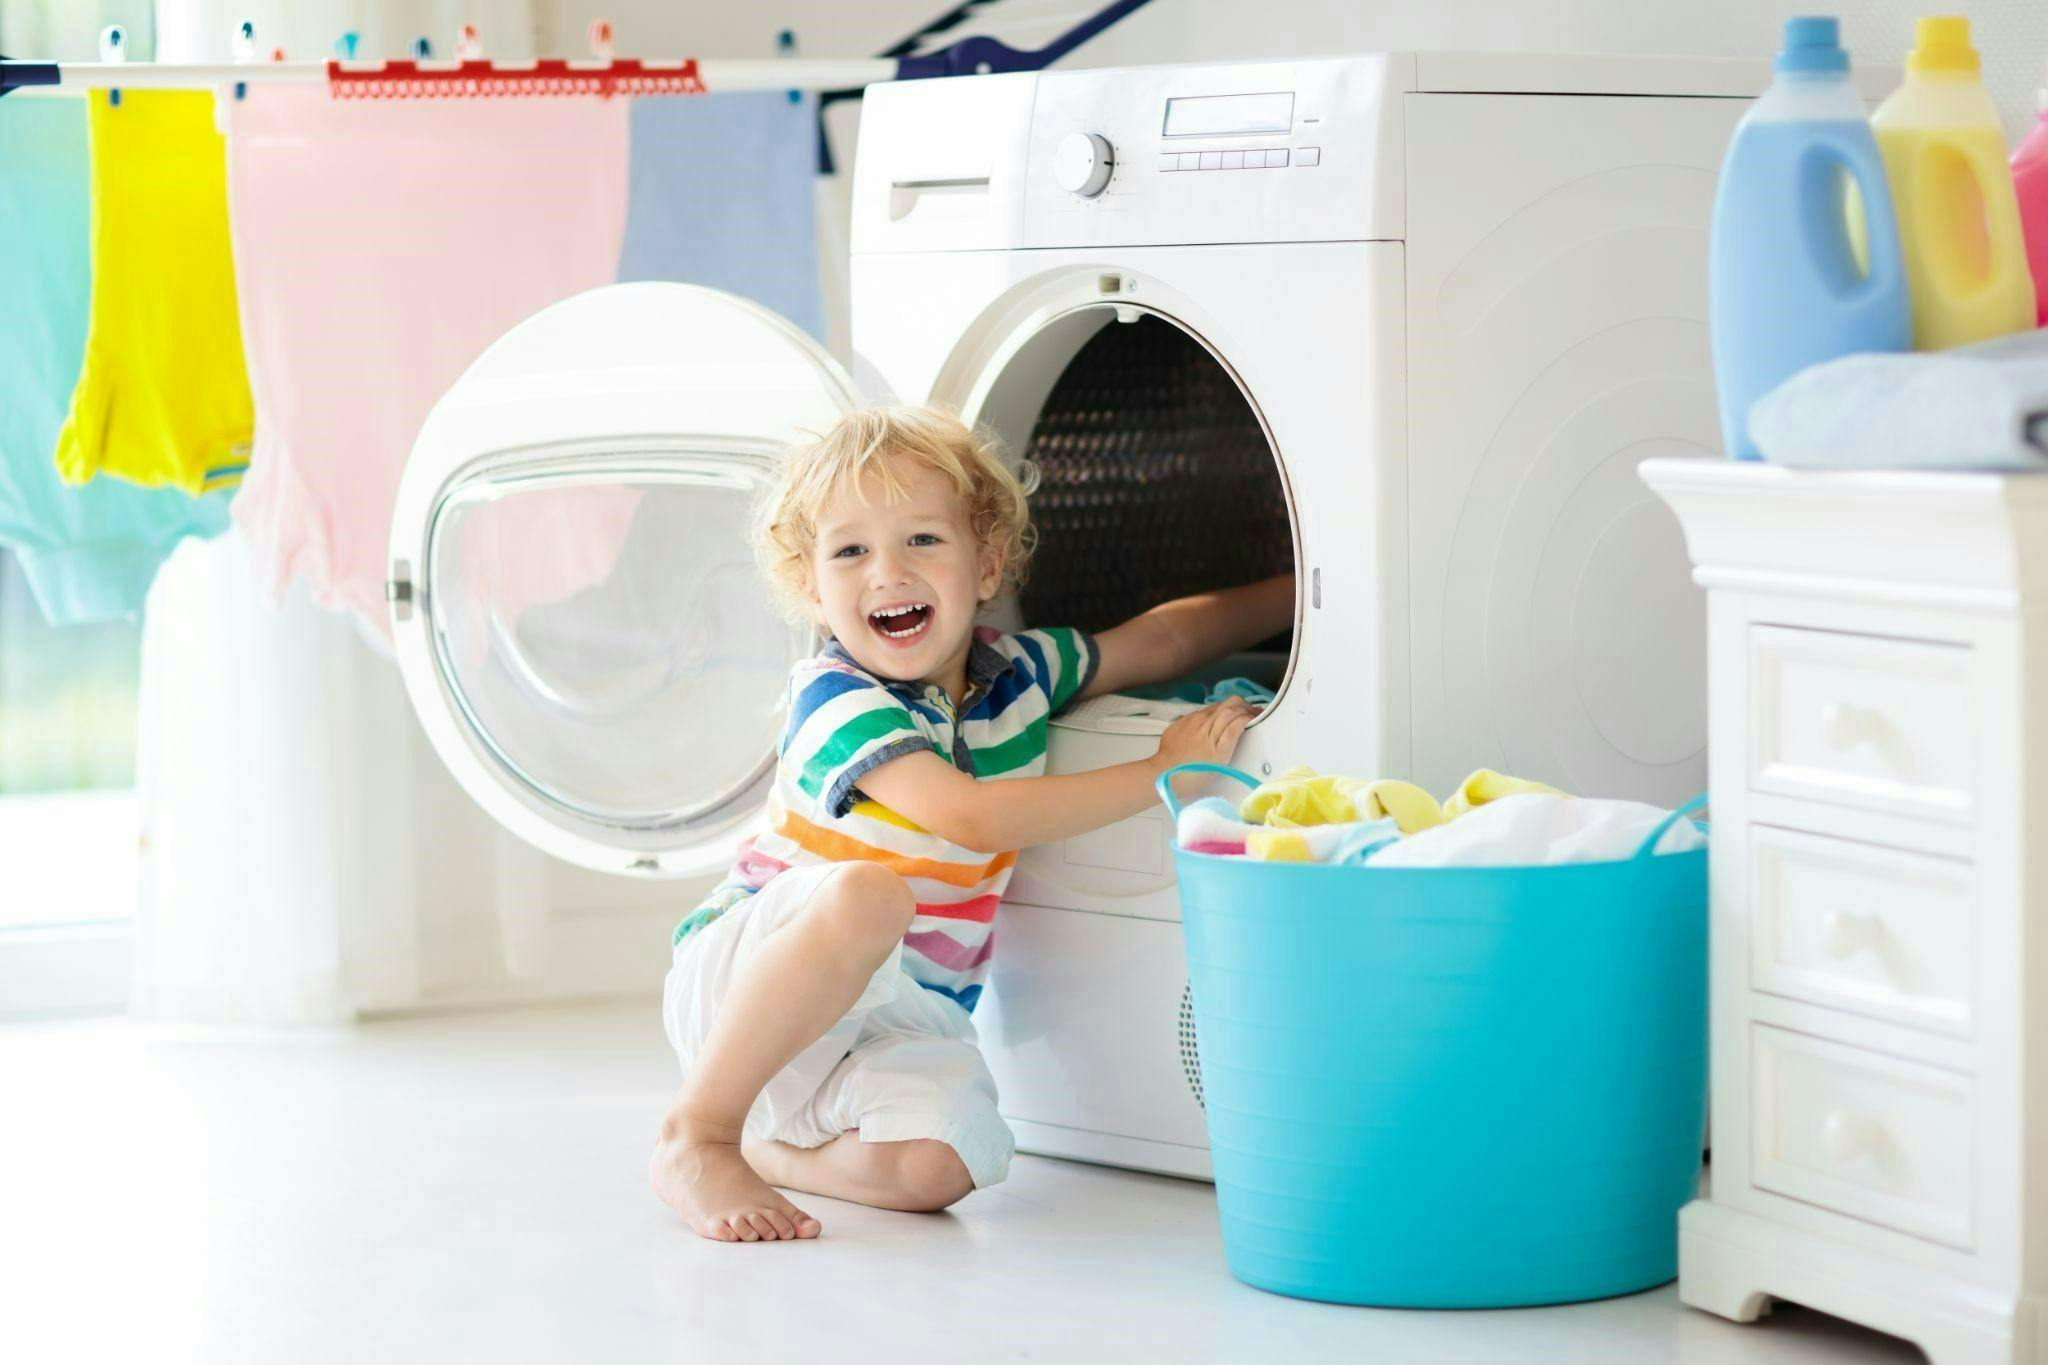 Water Softener Image of Child Taking out Laundry